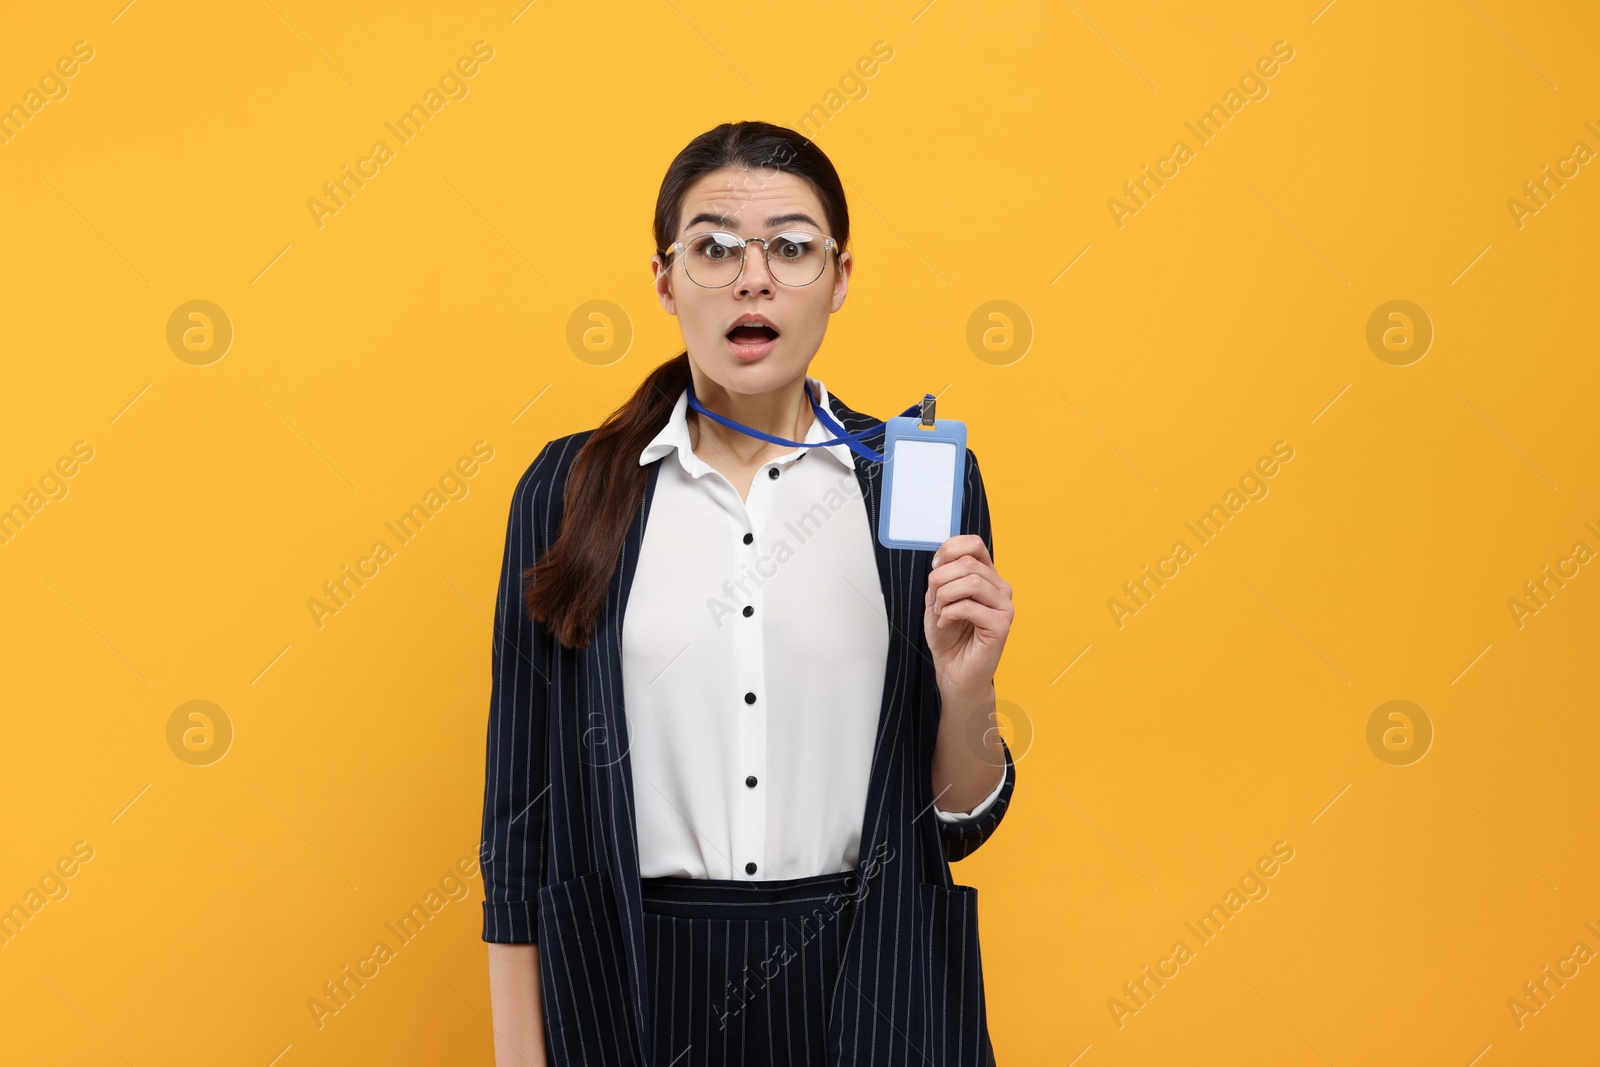 Photo of Shocked woman with vip pass badge on orange background